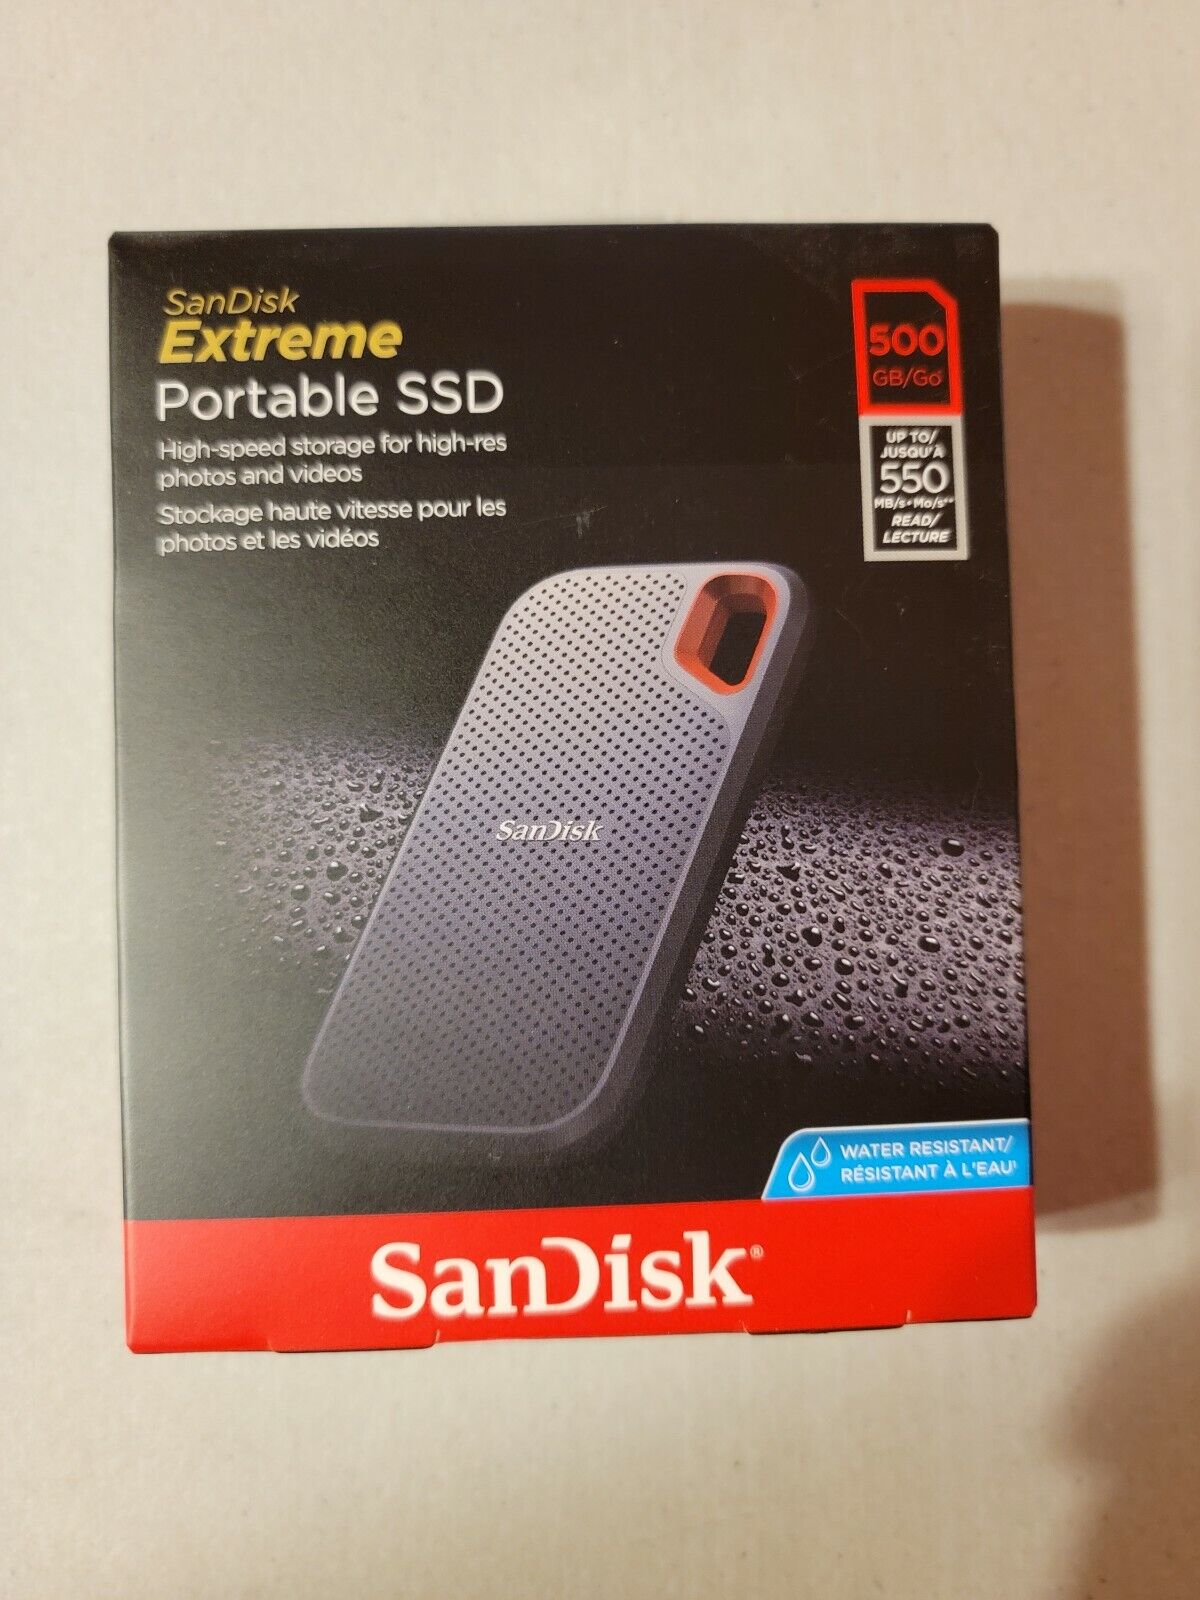 NEW - SanDisk Extreme Portable SSD 500gb External Hard Drive - SEALED 